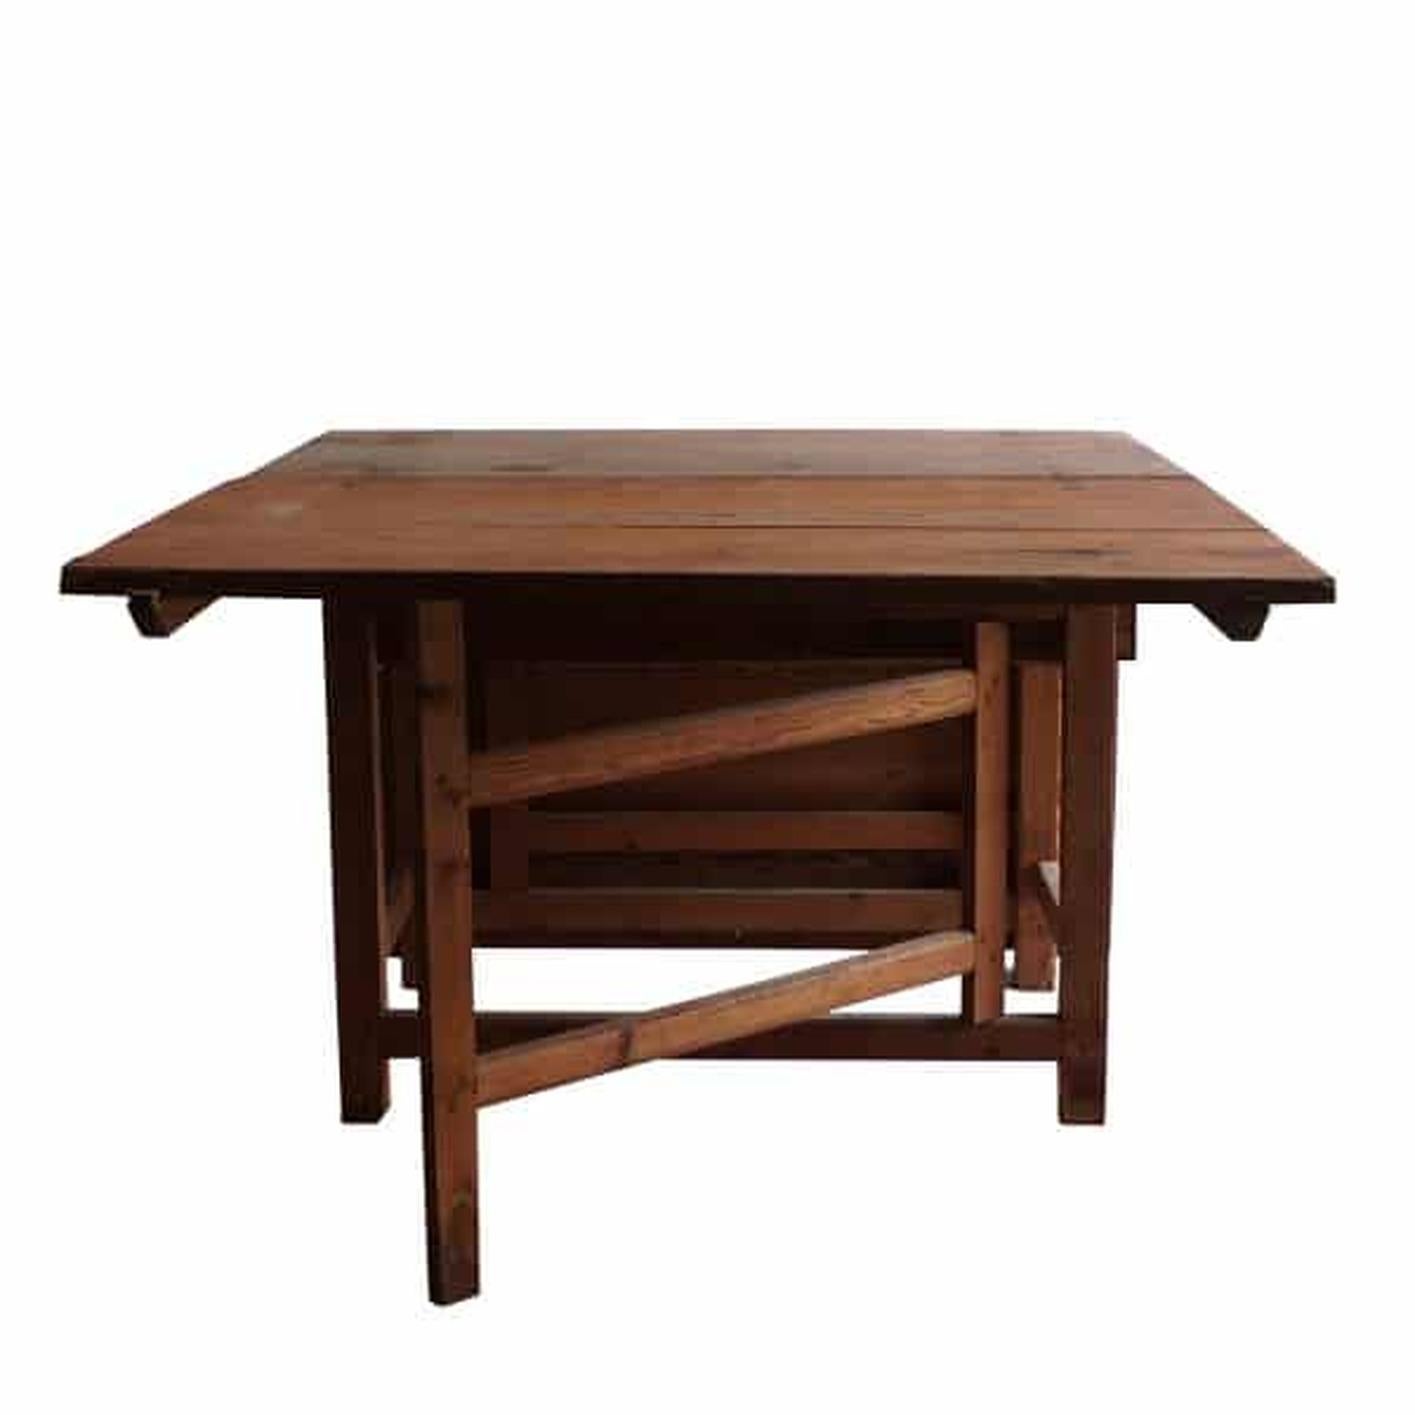 An antique Swedish farmhouse table made of walnut with drop leaves, in good condition. Wear consistent with age and use. Prov. Malmo, Sweden, Scandinavia, circa 1820.